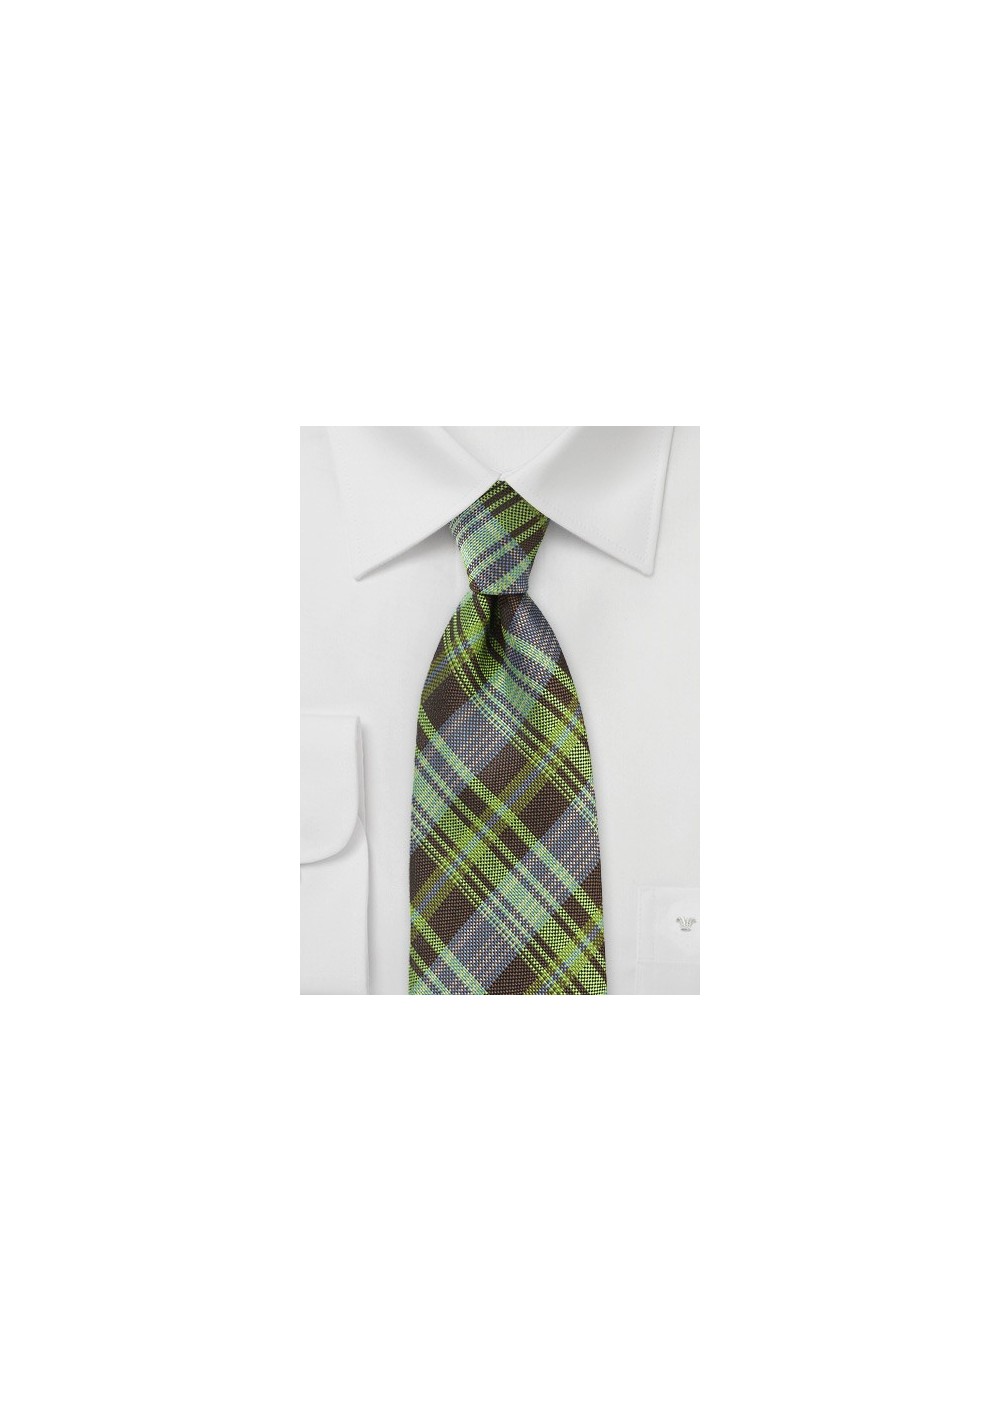 Modern Plaid Tie in Greens and Browns